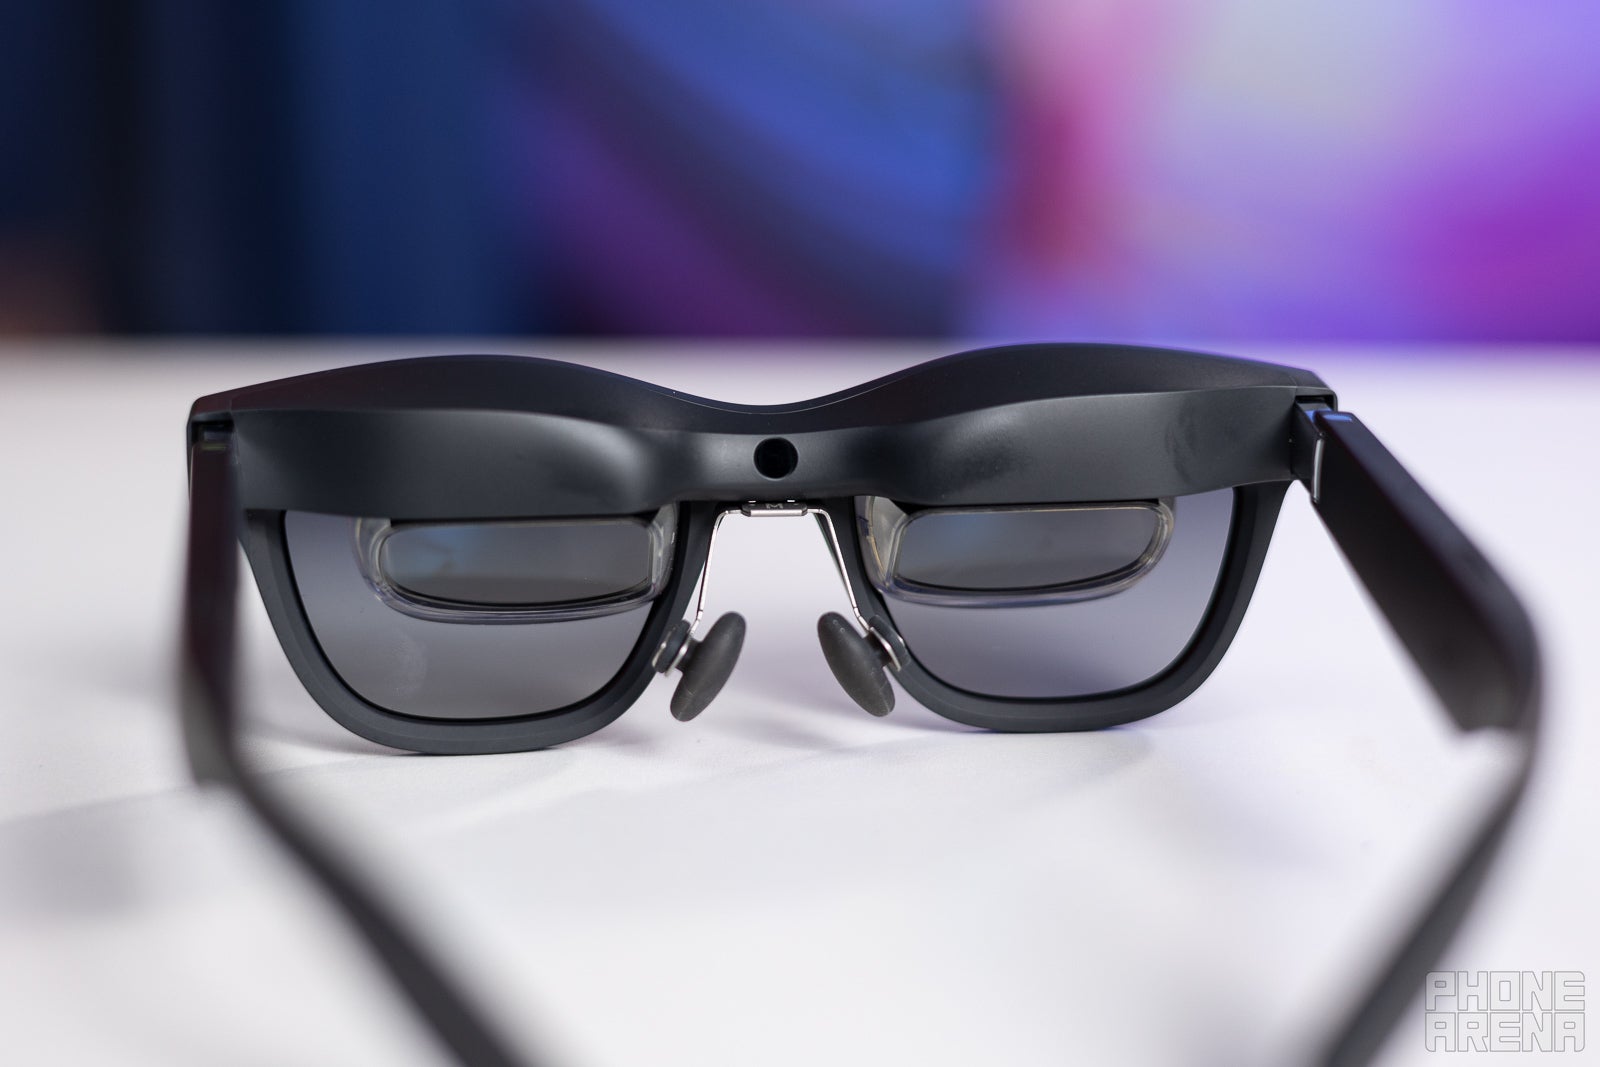 Xreal's New $399 Air 2 AR Glasses Add Micro-OLED Displays